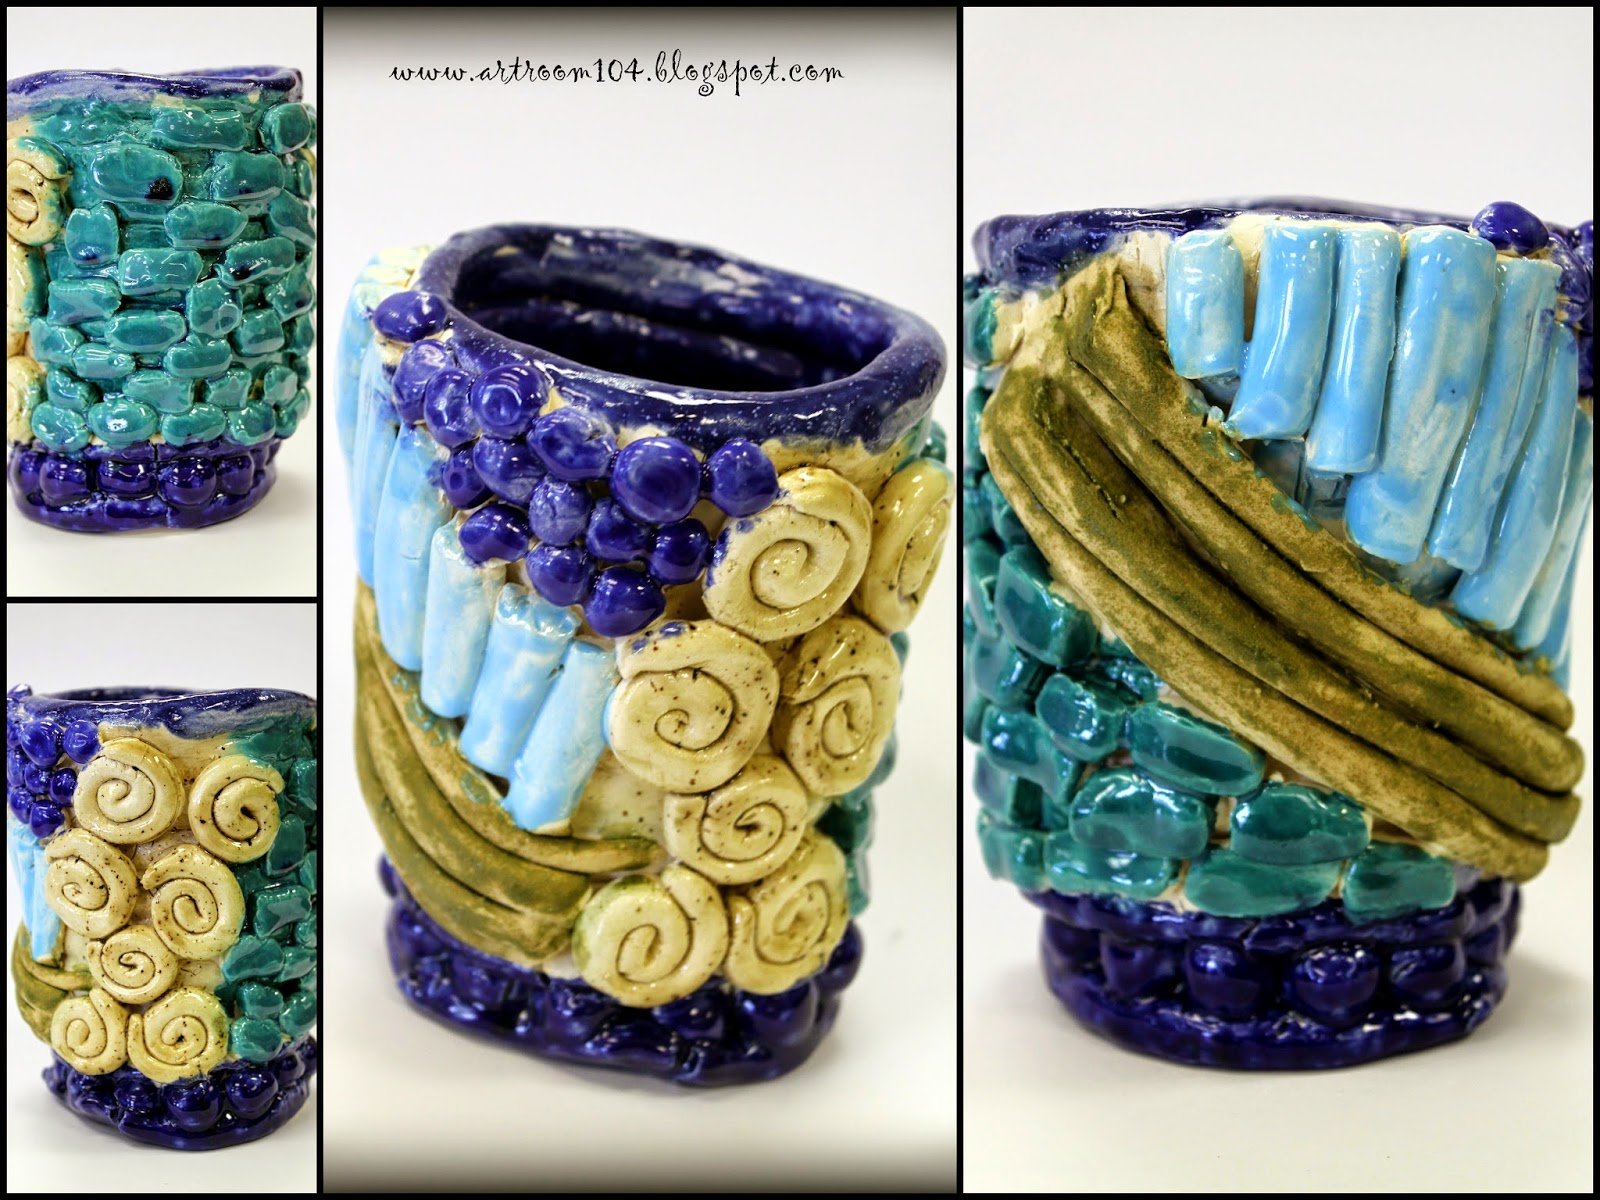 Clay coil pot - The Craft Train